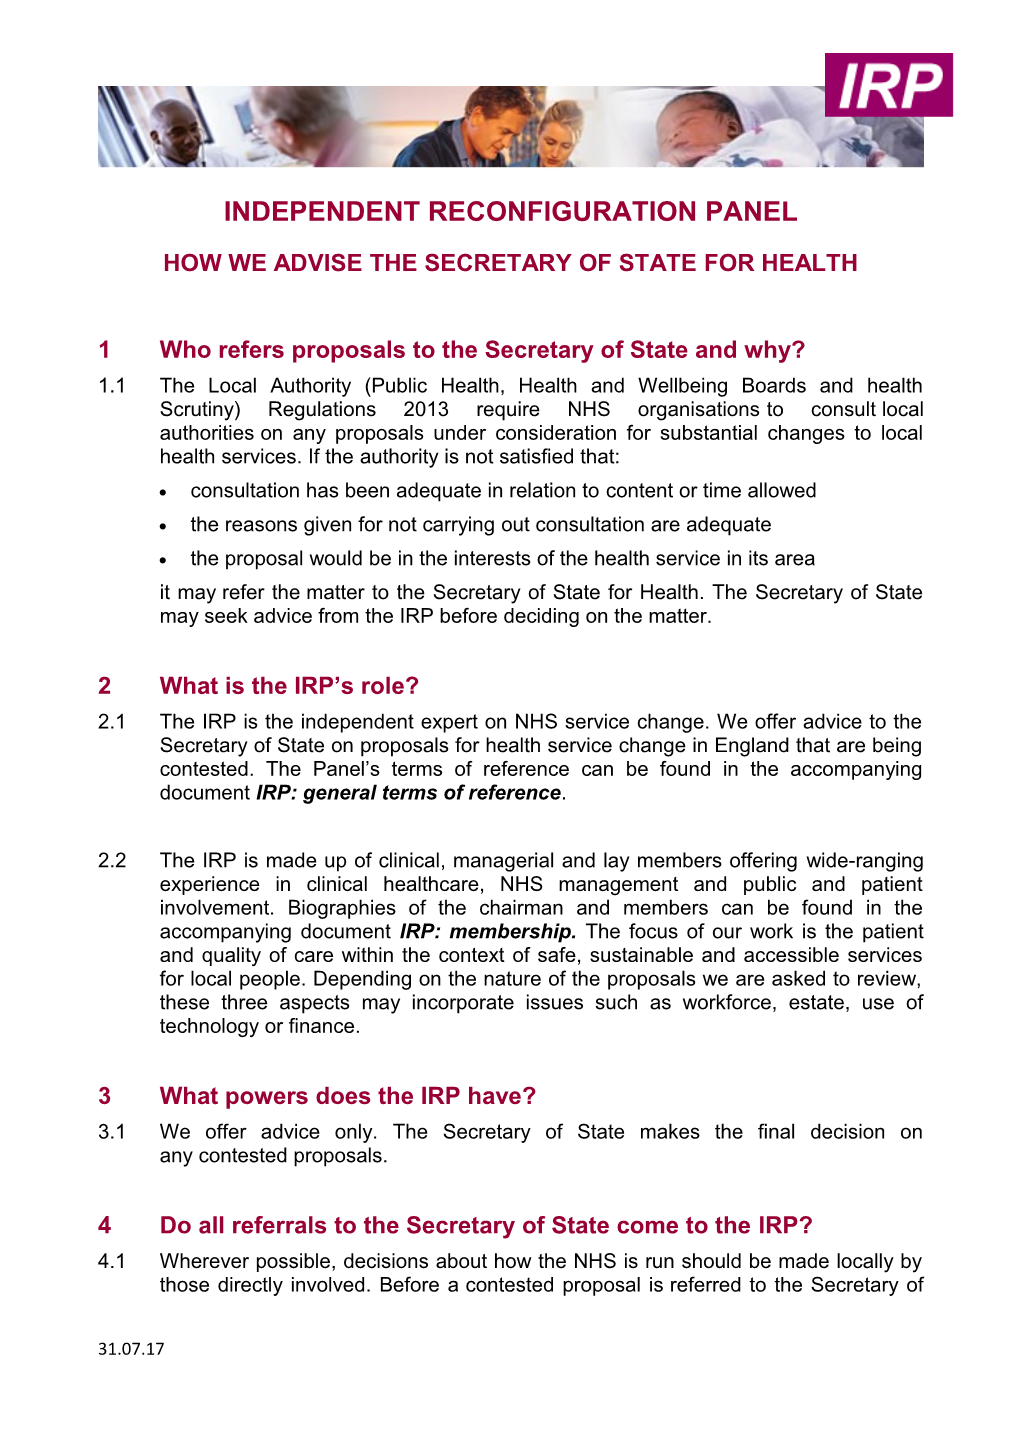 How We Advise the Secretary of State for Health